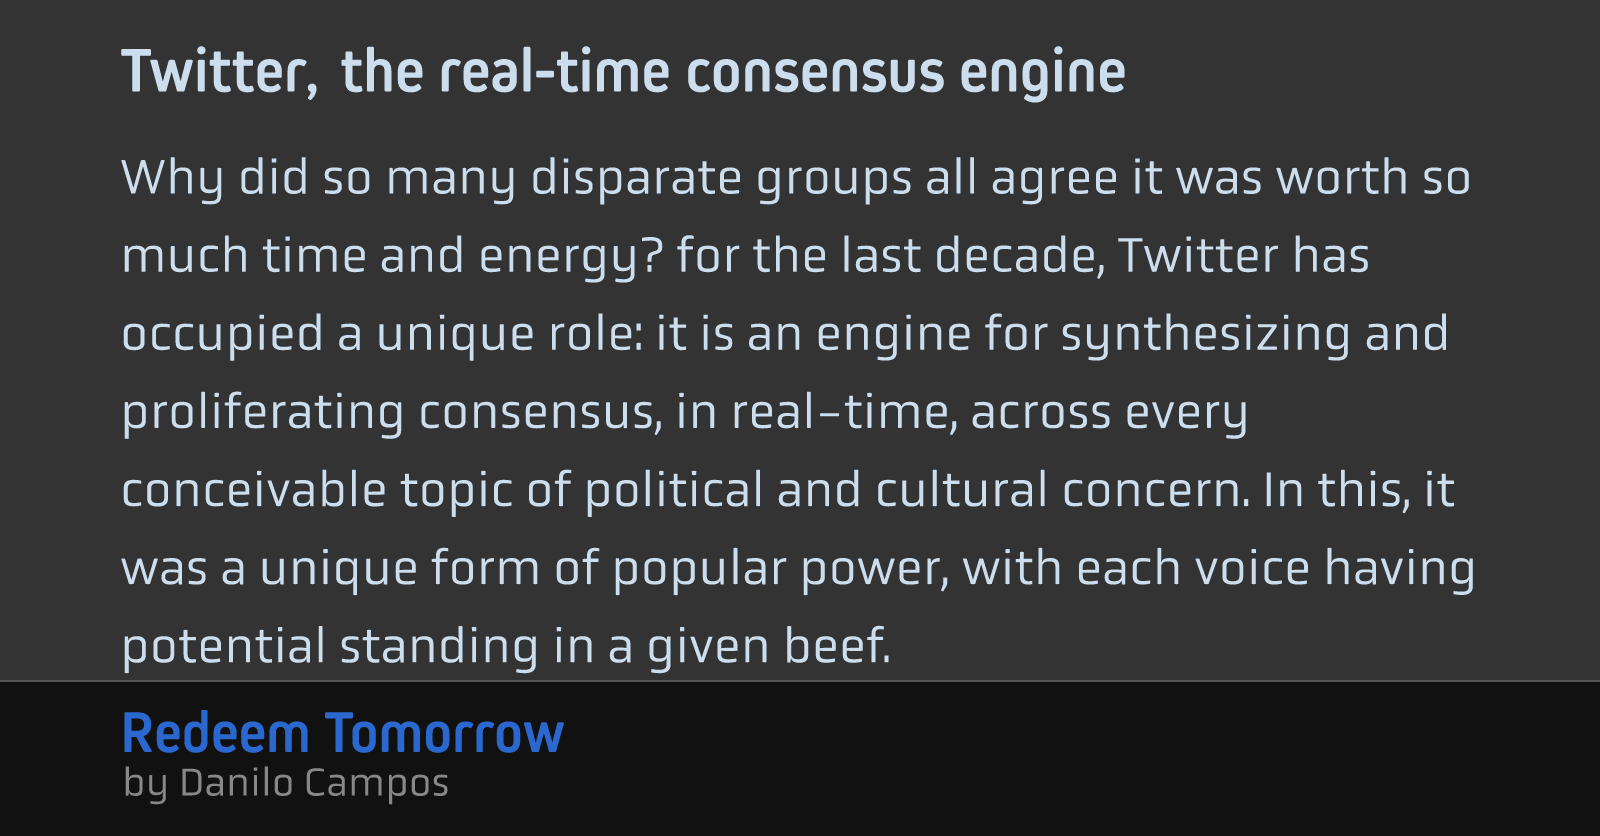 Twitter, the real-time consensus engine